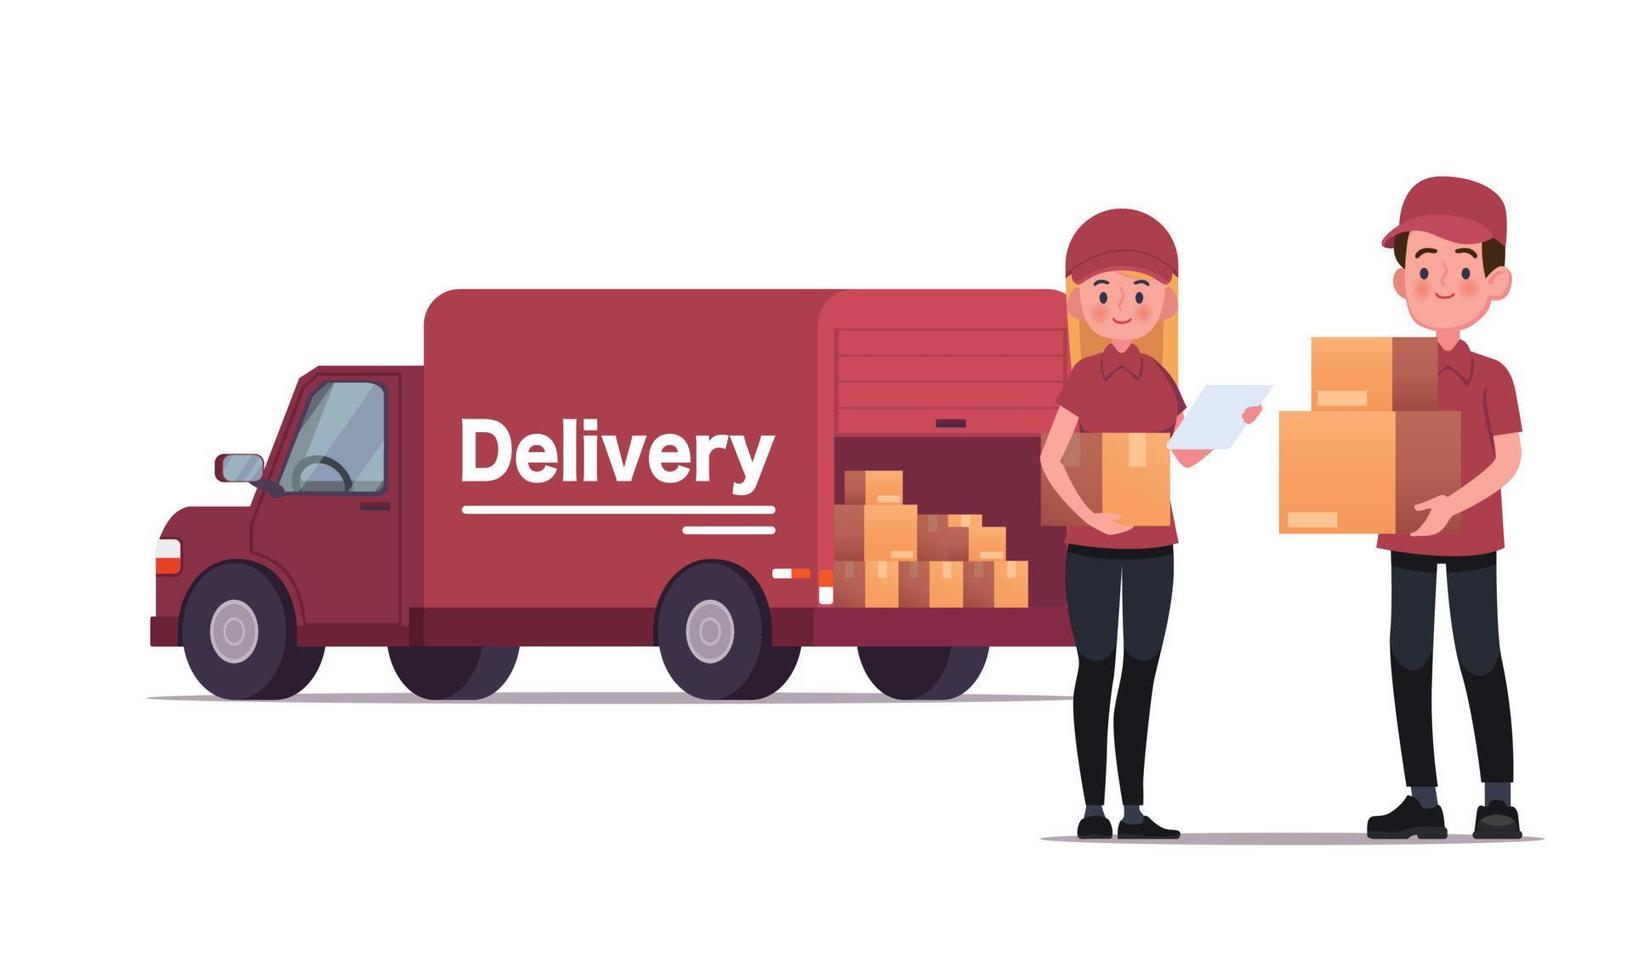 Delivery courier carrying packages with delivery truck vector illustration